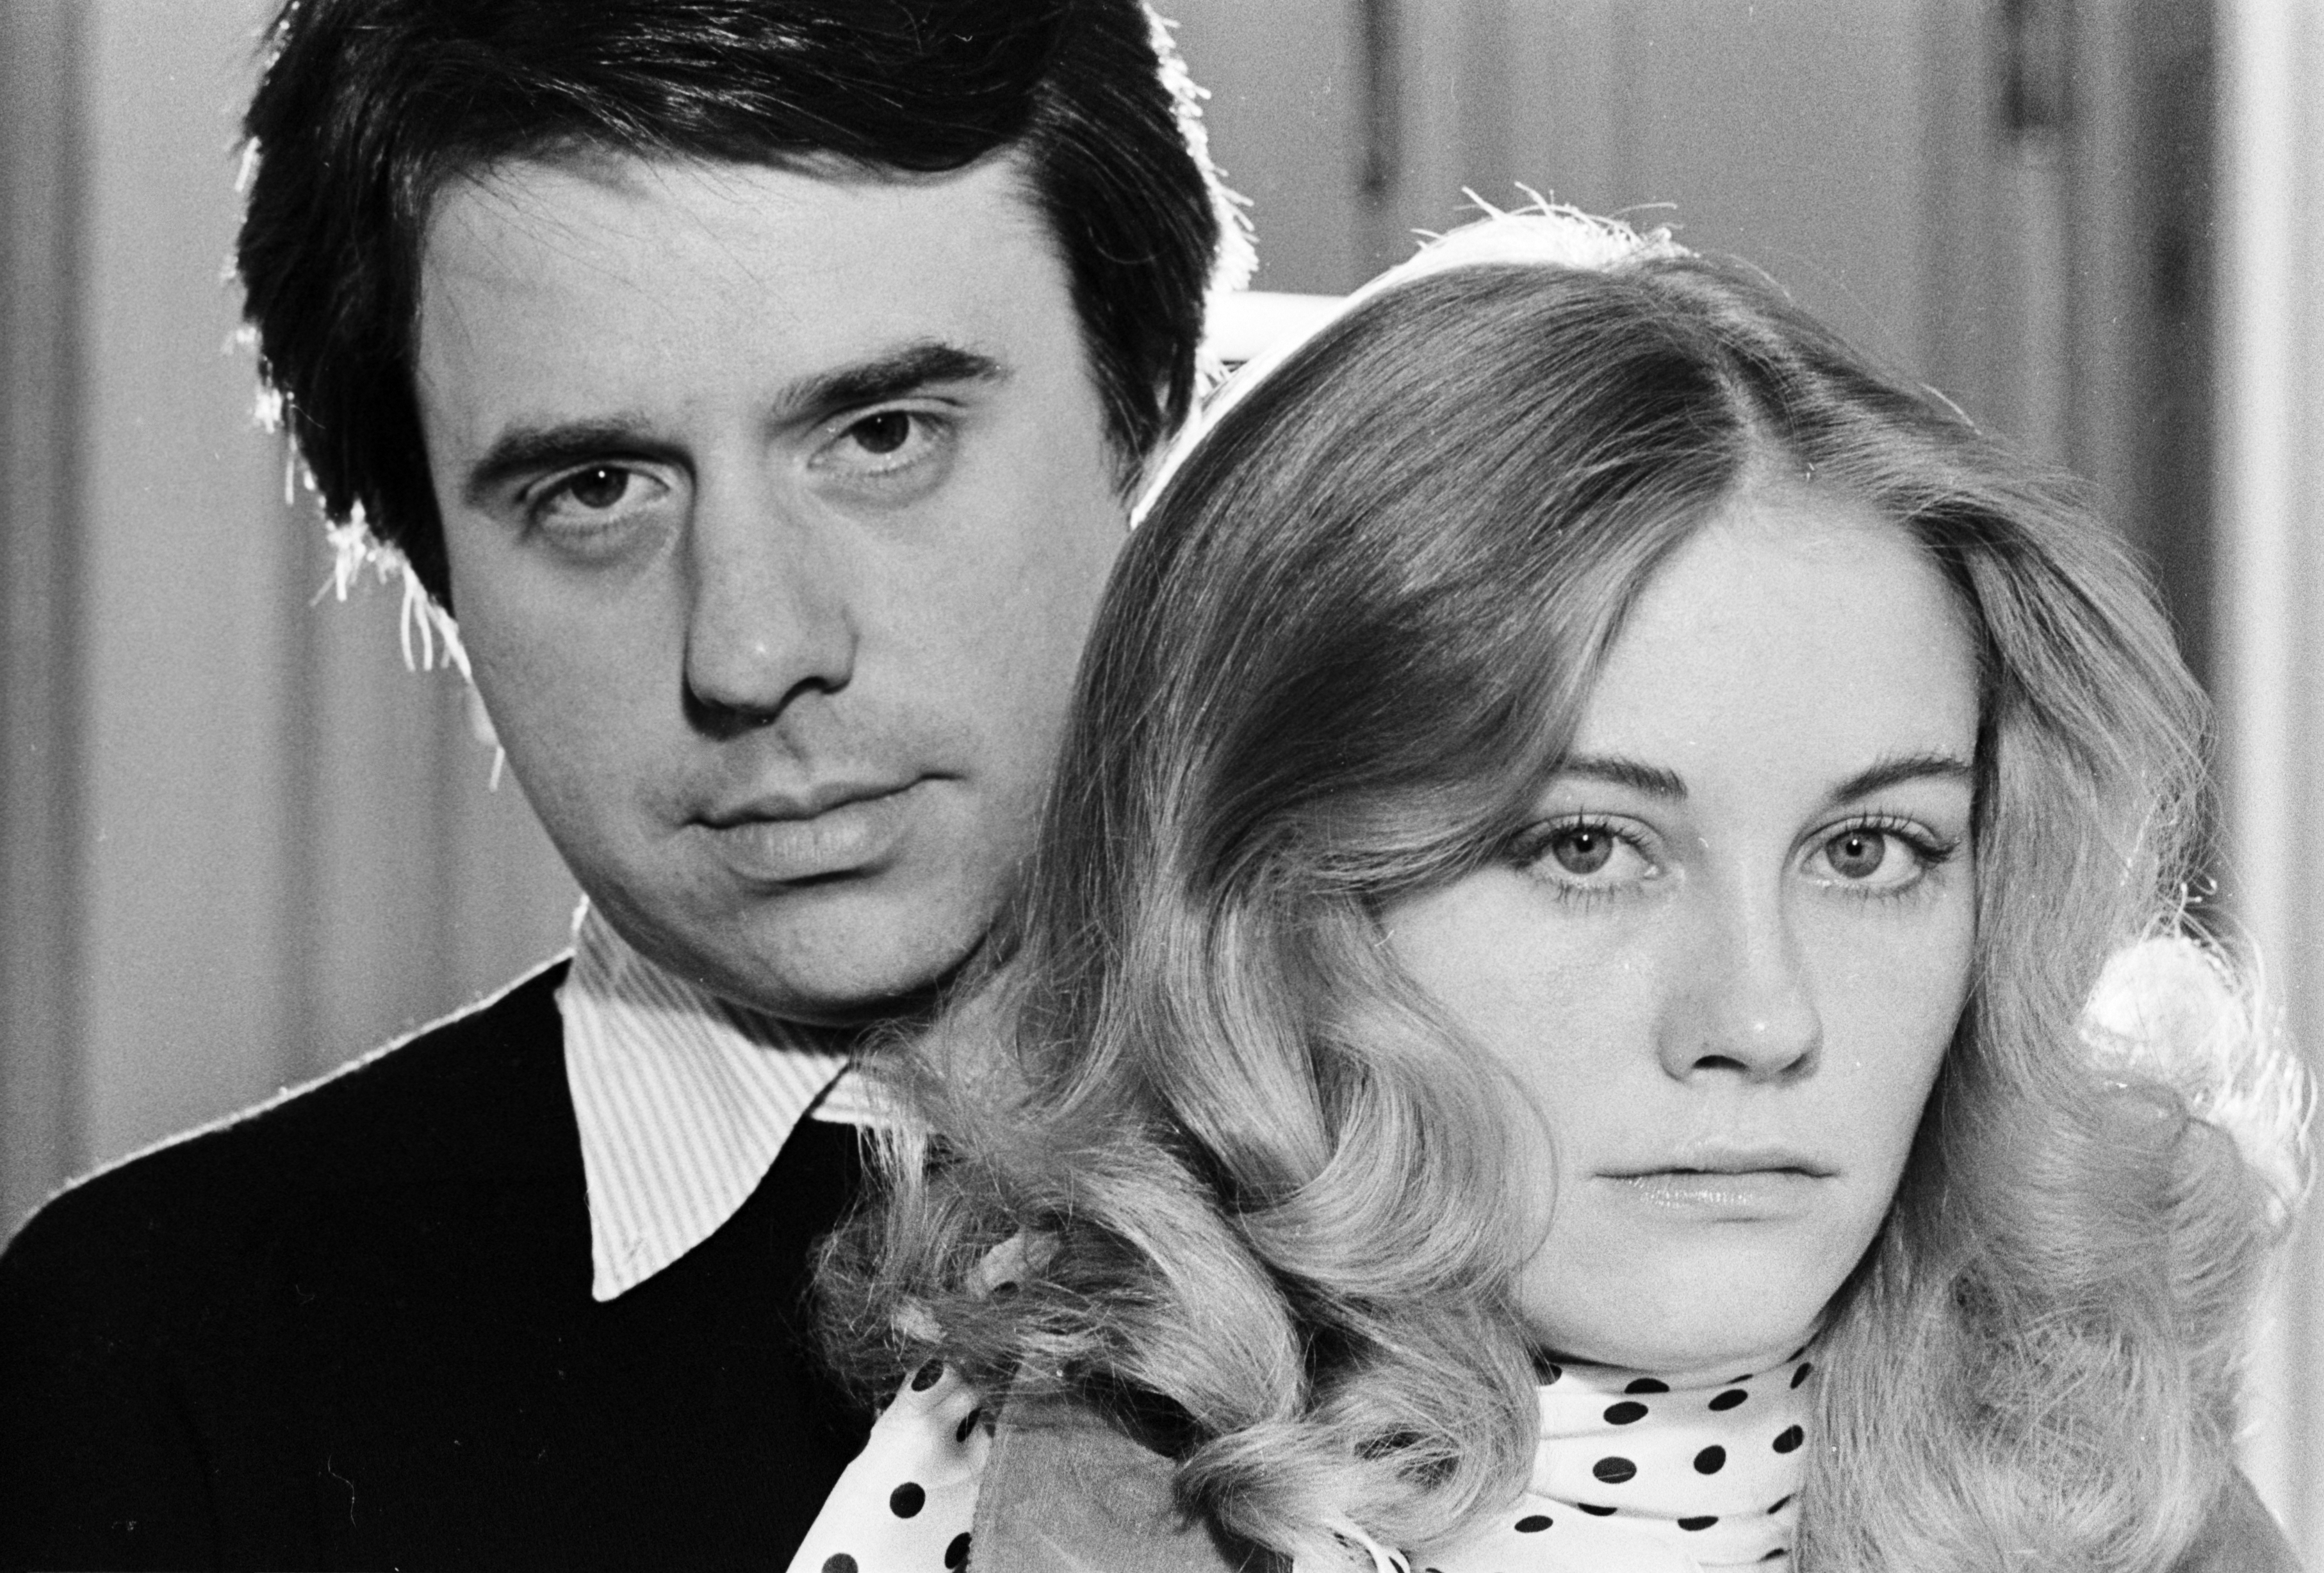 Peter Bogdanovich and Cybill Shepherd in May 1974, before the release of "Daisy Miller." | Source: Getty Images